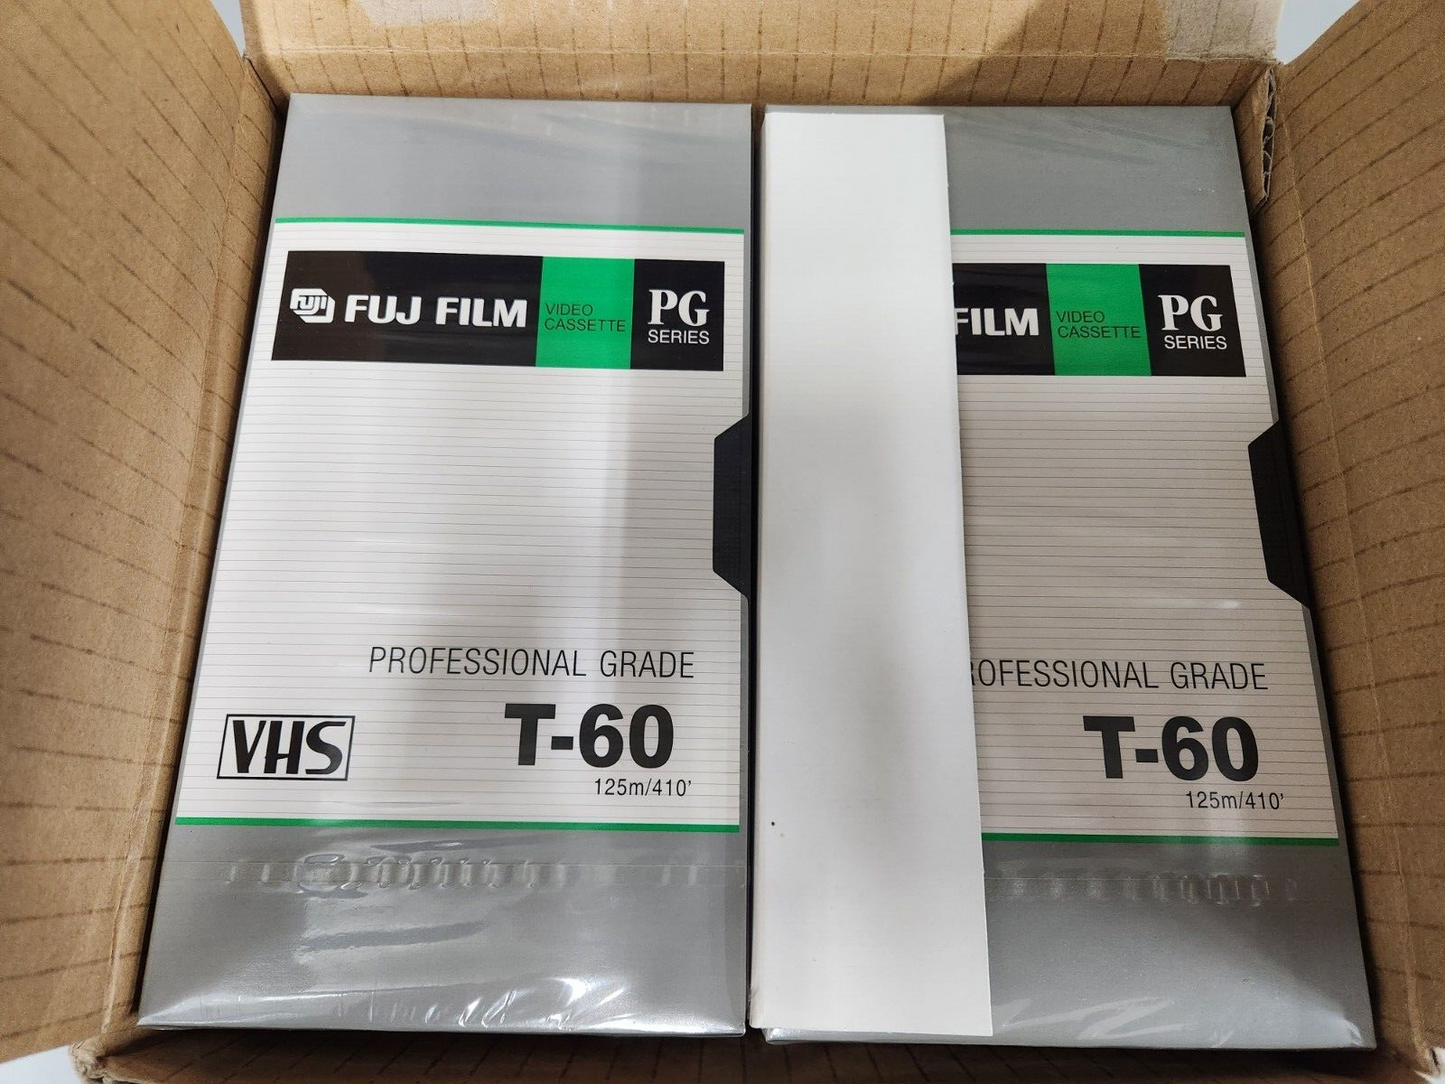 FUJI Blank Professional Grade Videocassette T-60 VHS Tapes PG Series LOT OF 10